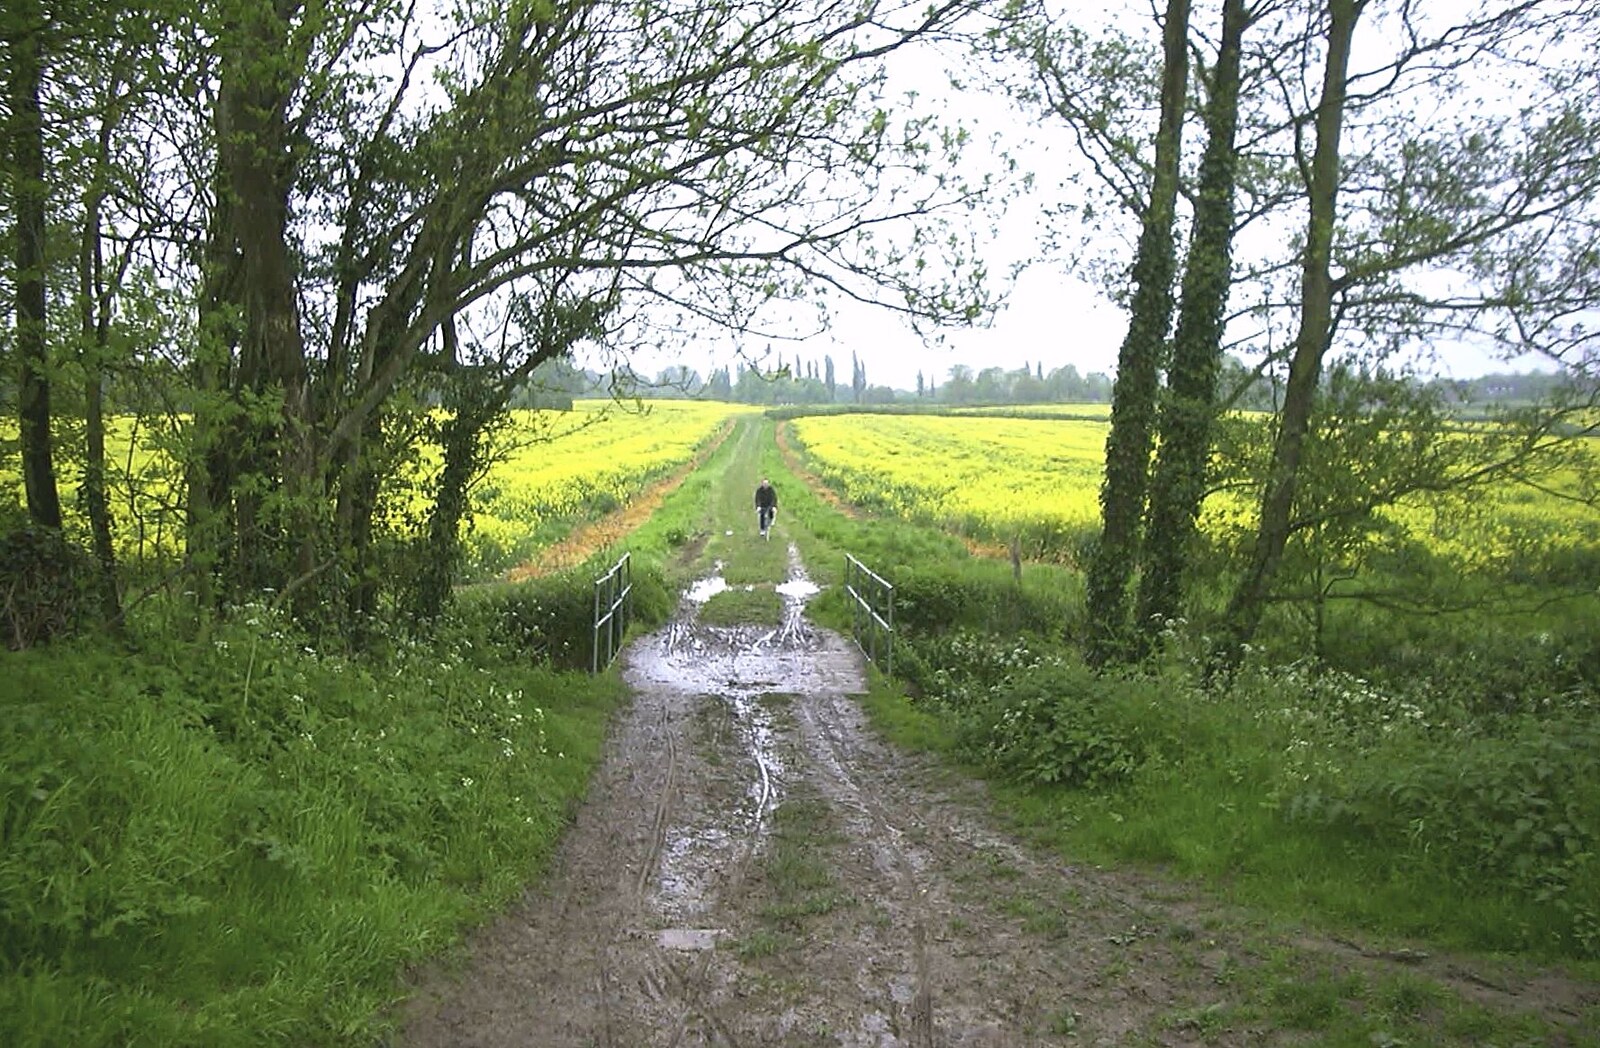 The BSCC Annual Bike Ride, Lenham, Kent - 8th May 2004: DH goes a bit off road